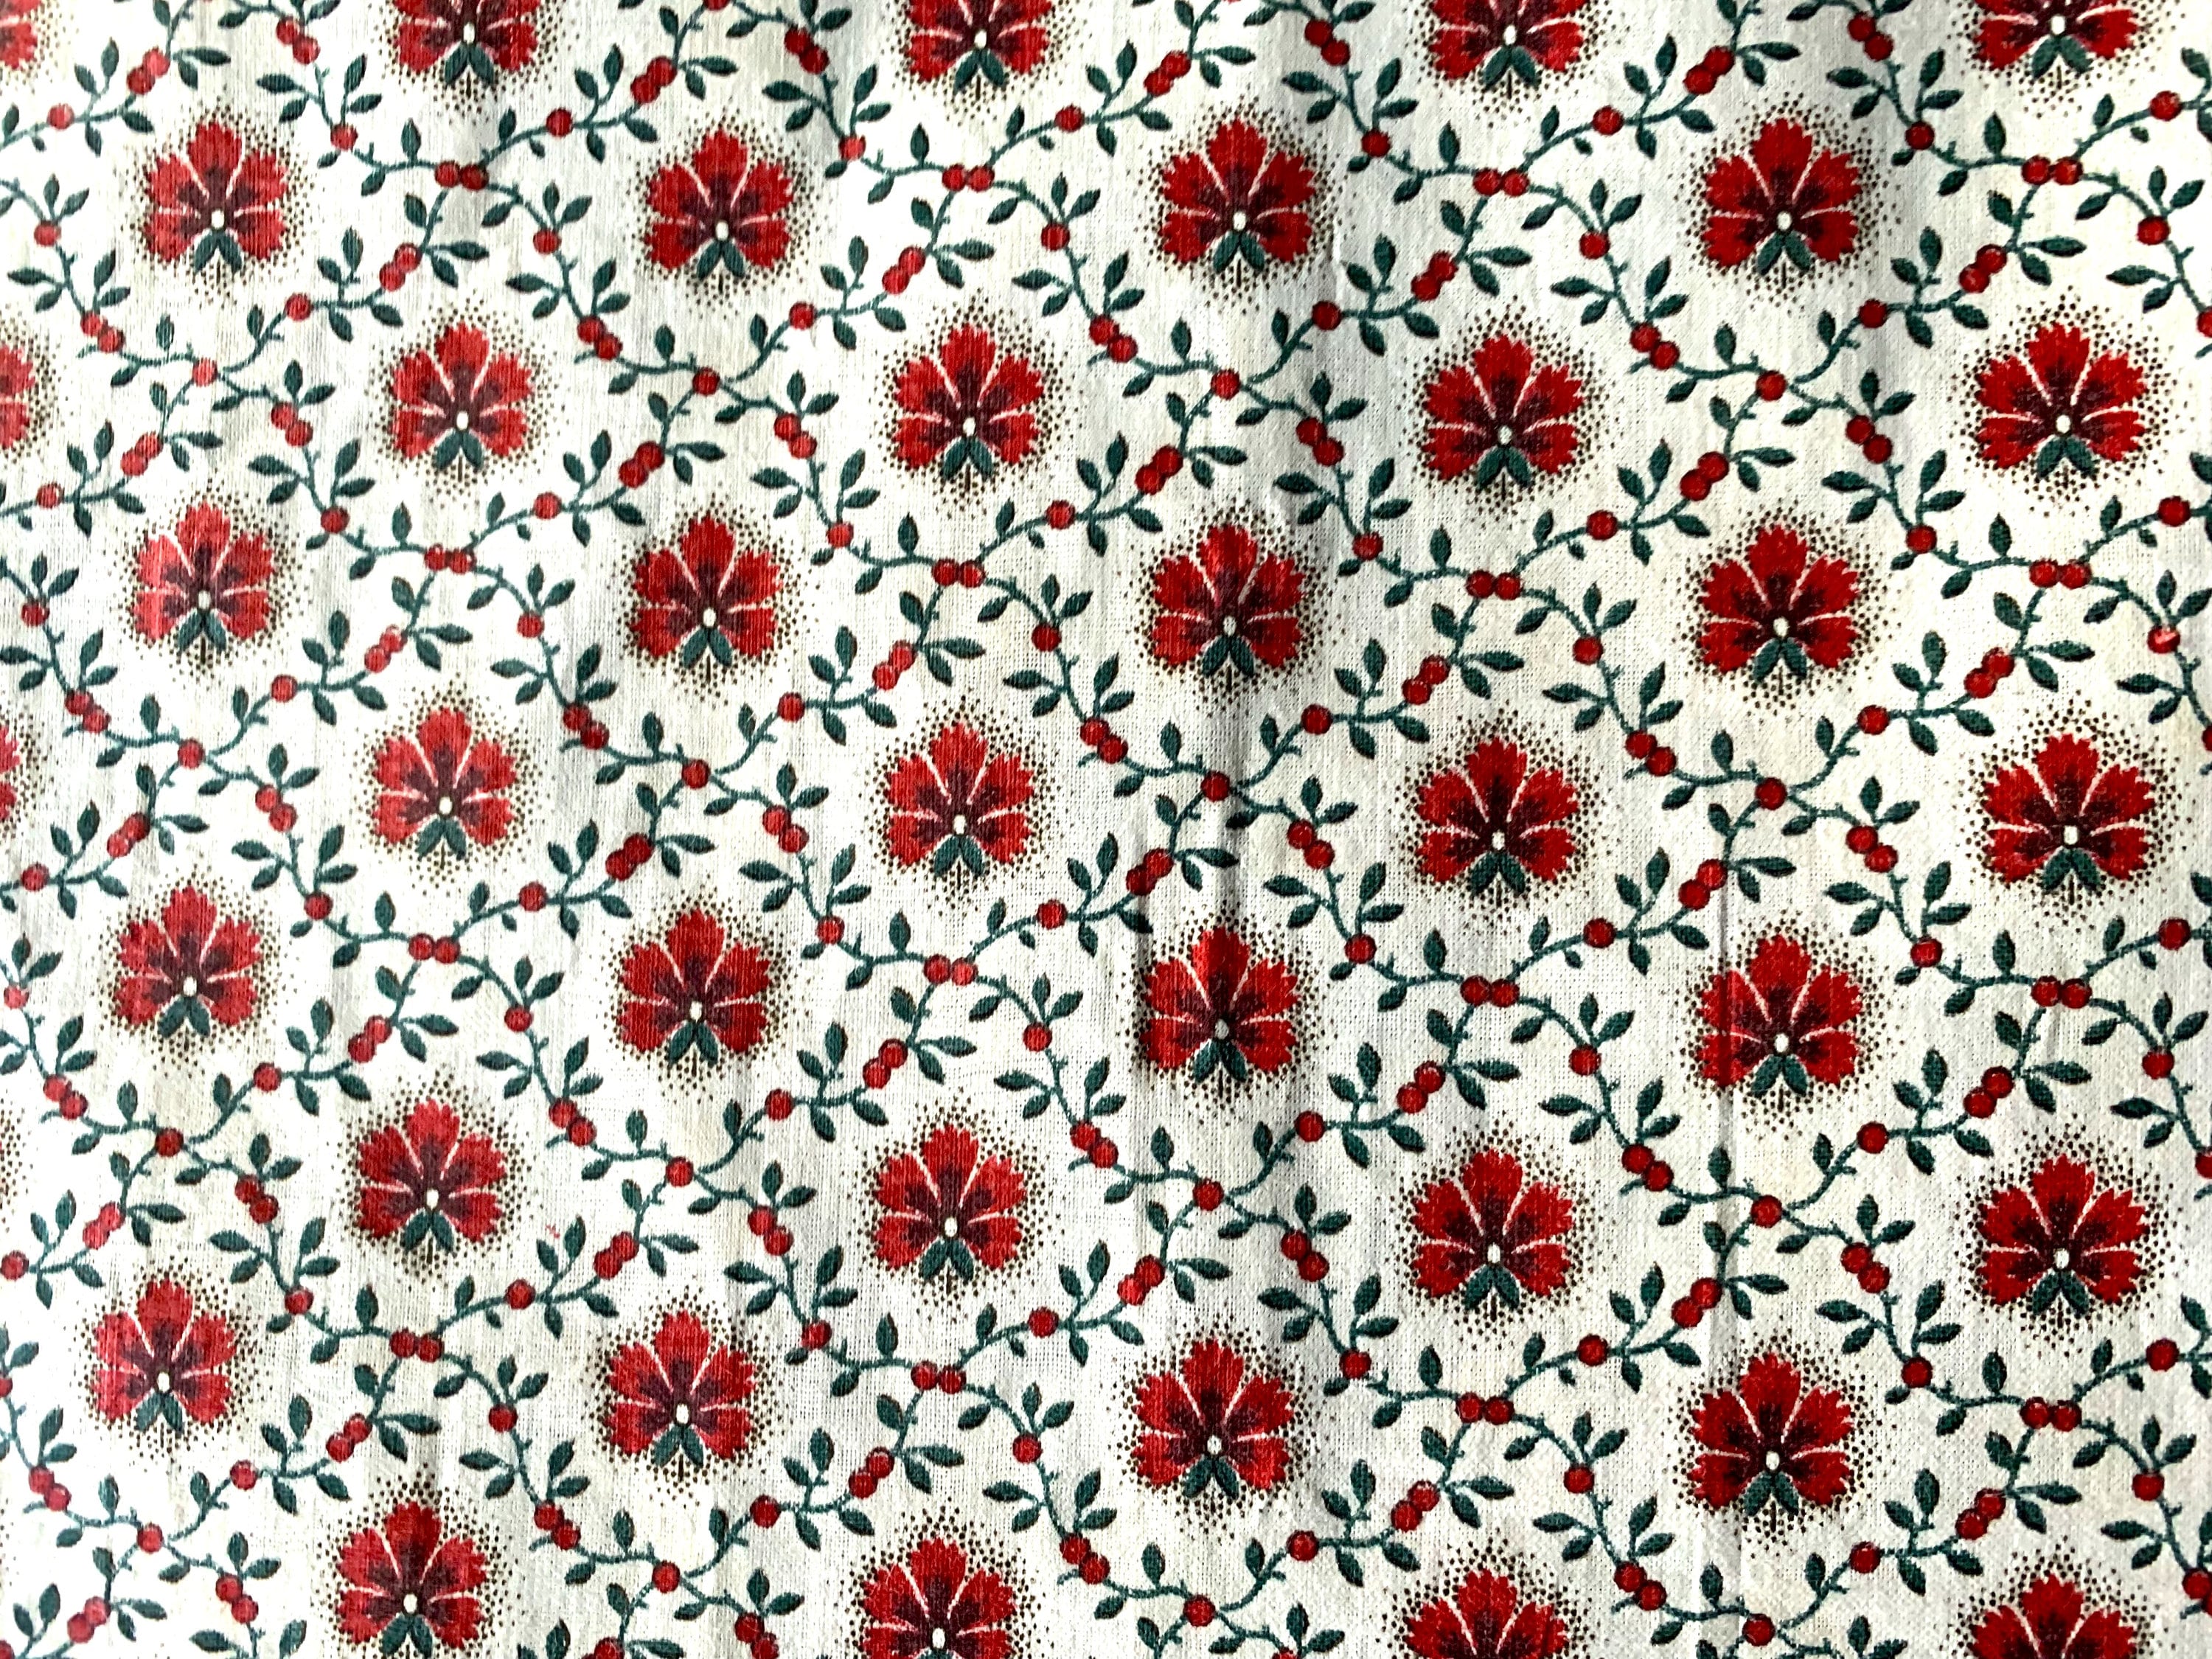 Maroon Floral Chintz Moving Editions Vintage Fabric By The Yard Affordable  Home Fabrics Buy now and save money